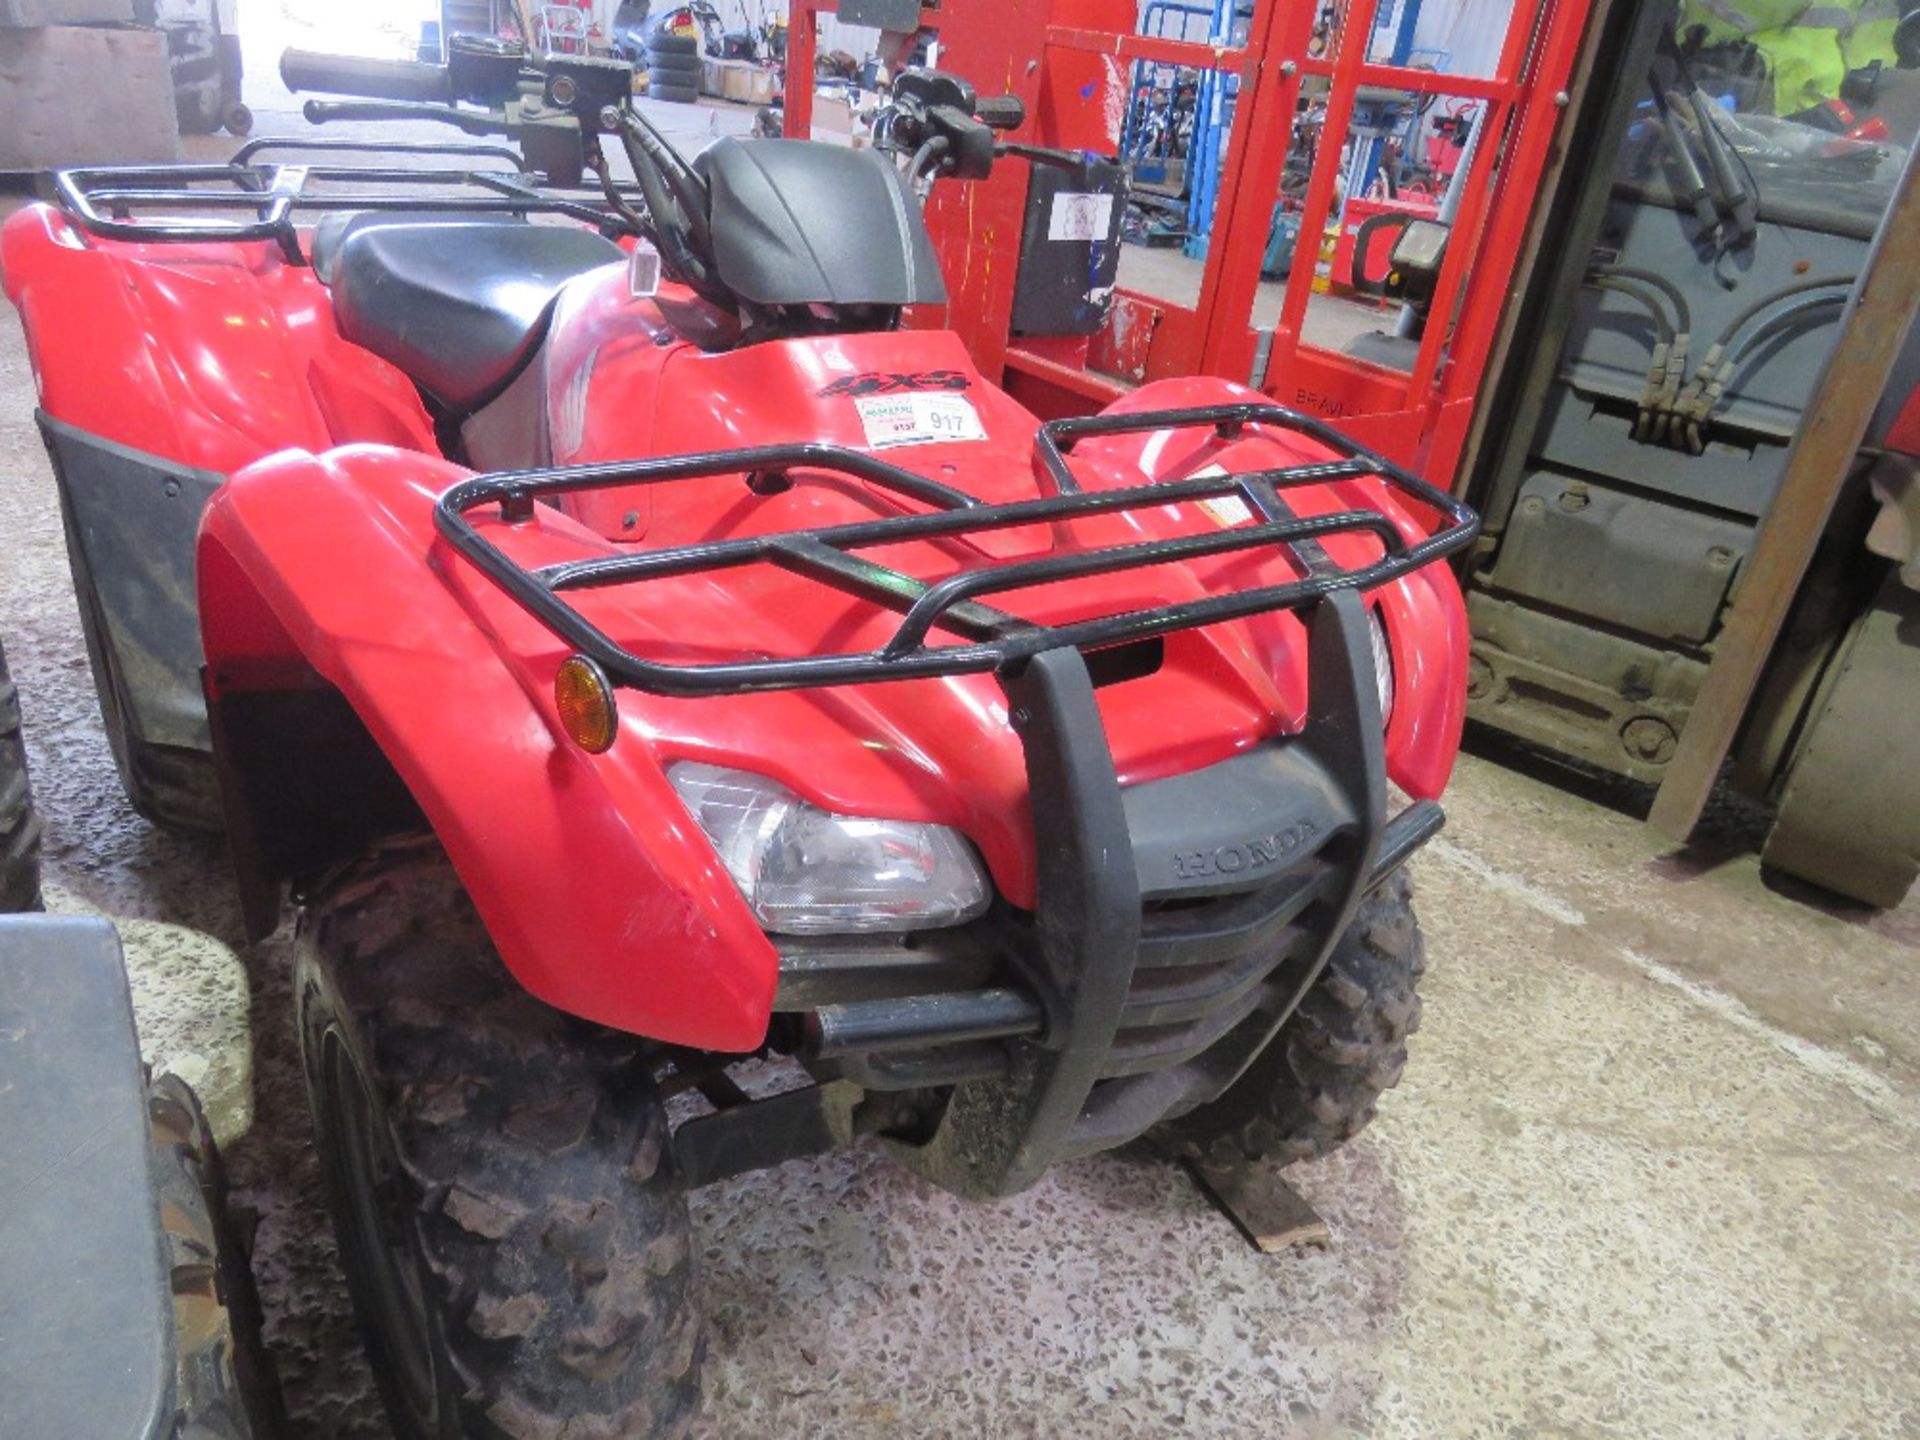 HONDA SELECTABLE 4 WHEEL DRIVE QUAD BIKE WITH ELECTRONIC GEAR SELECTION. WHEN TESTED WAS SEEN TO RUN - Image 2 of 11